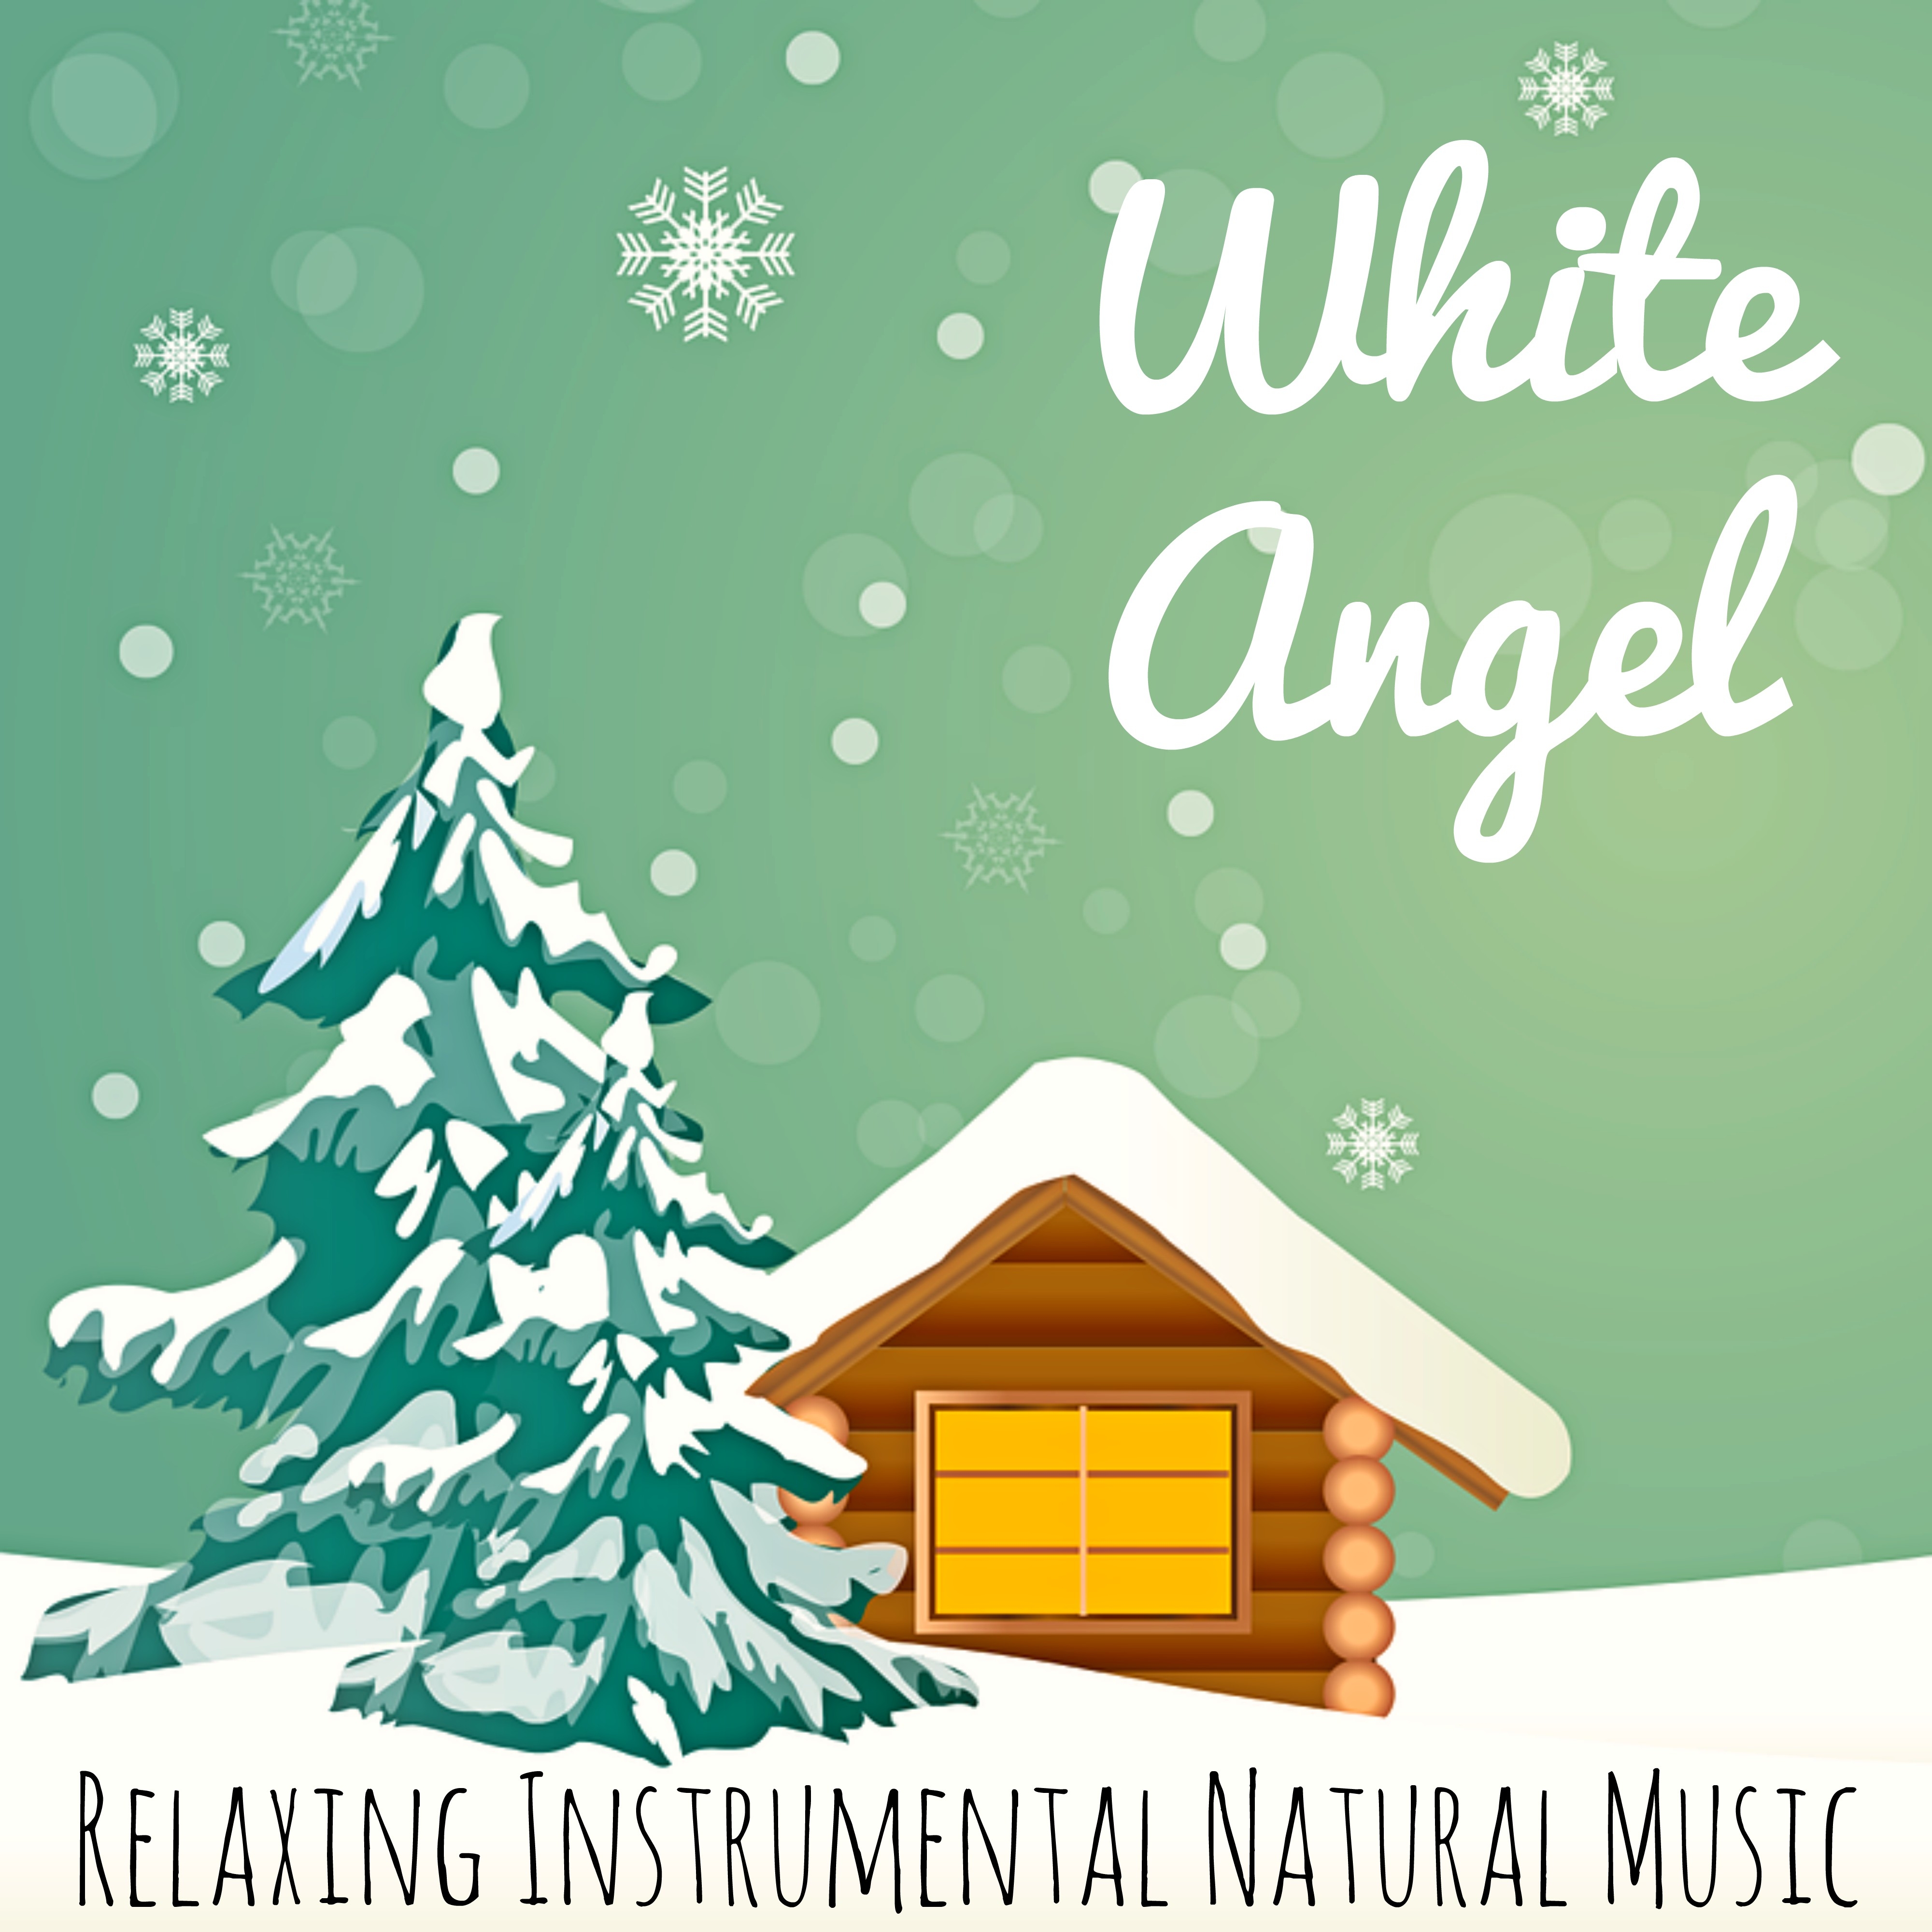 White Angel - Relaxing Instrumental Natural Music for Christmas Time New Year Soft Moments with Soothing Healing Meditative Sounds